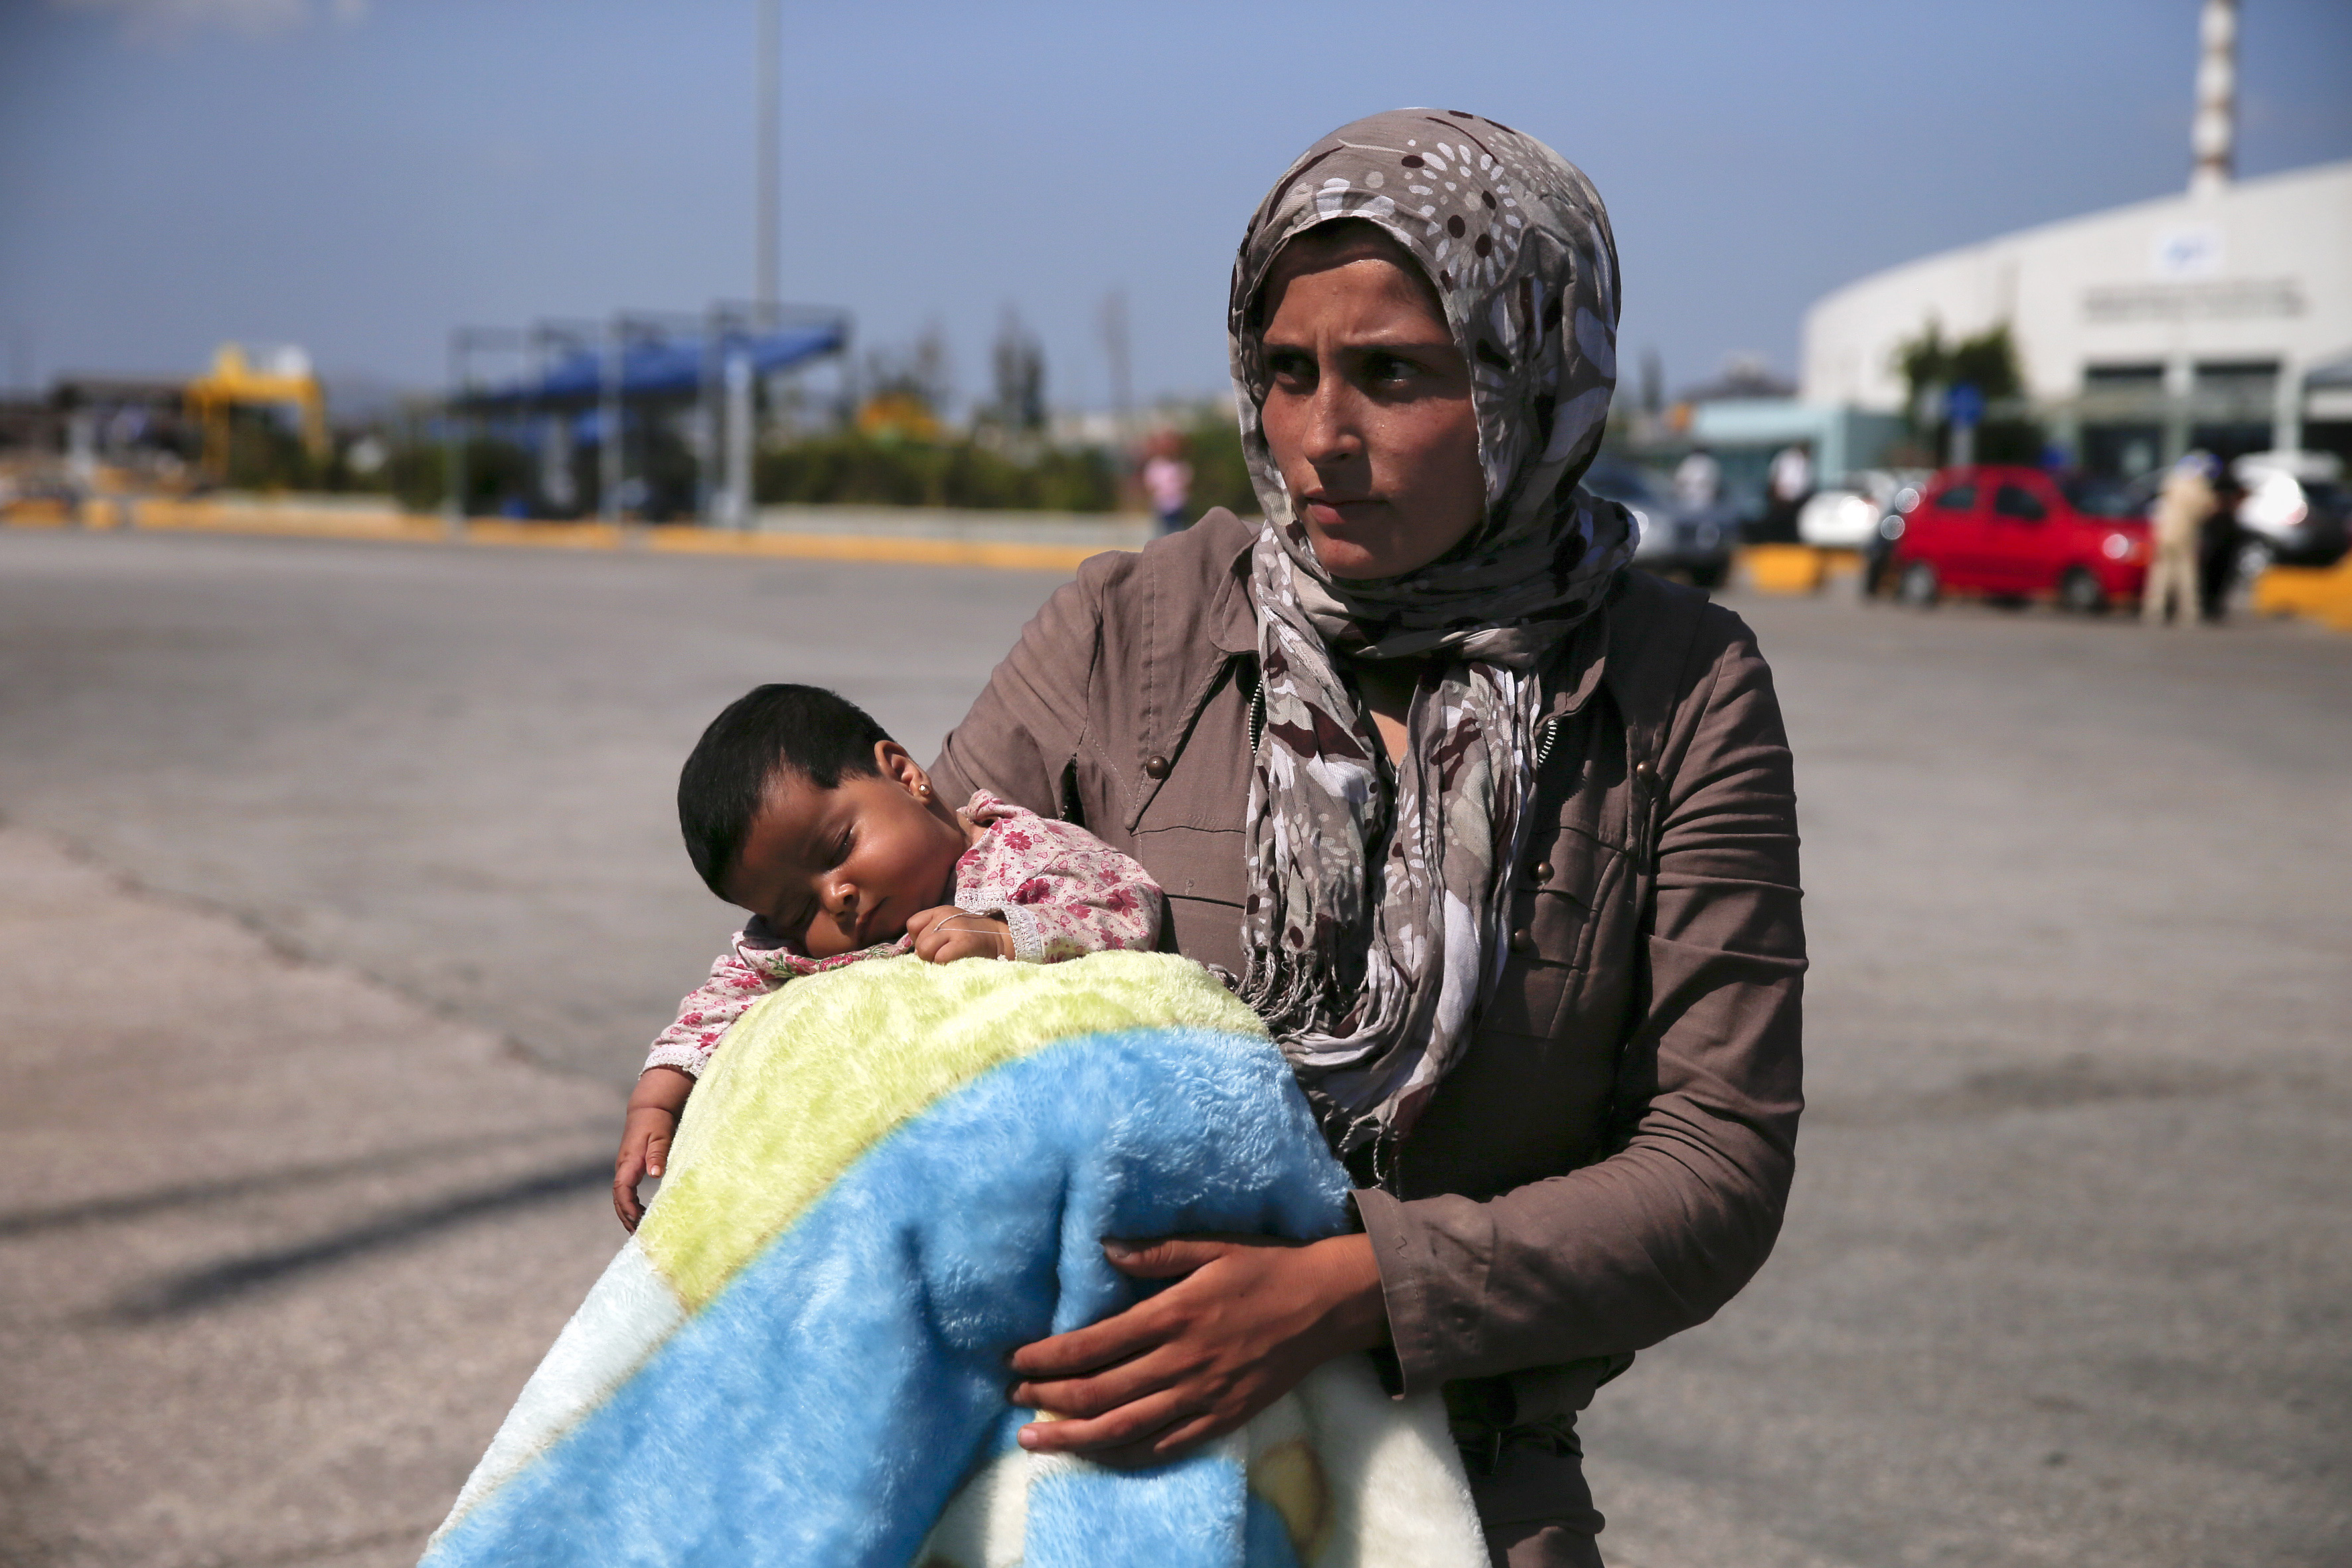 A Syrian refugee holds her baby following their arrival onboard the Eleftherios Venizelos passenger ship at the port of Piraeus, near Athens, Greece on Sept. 8, 2015. (Alkis Konstantinidis—Reuters)